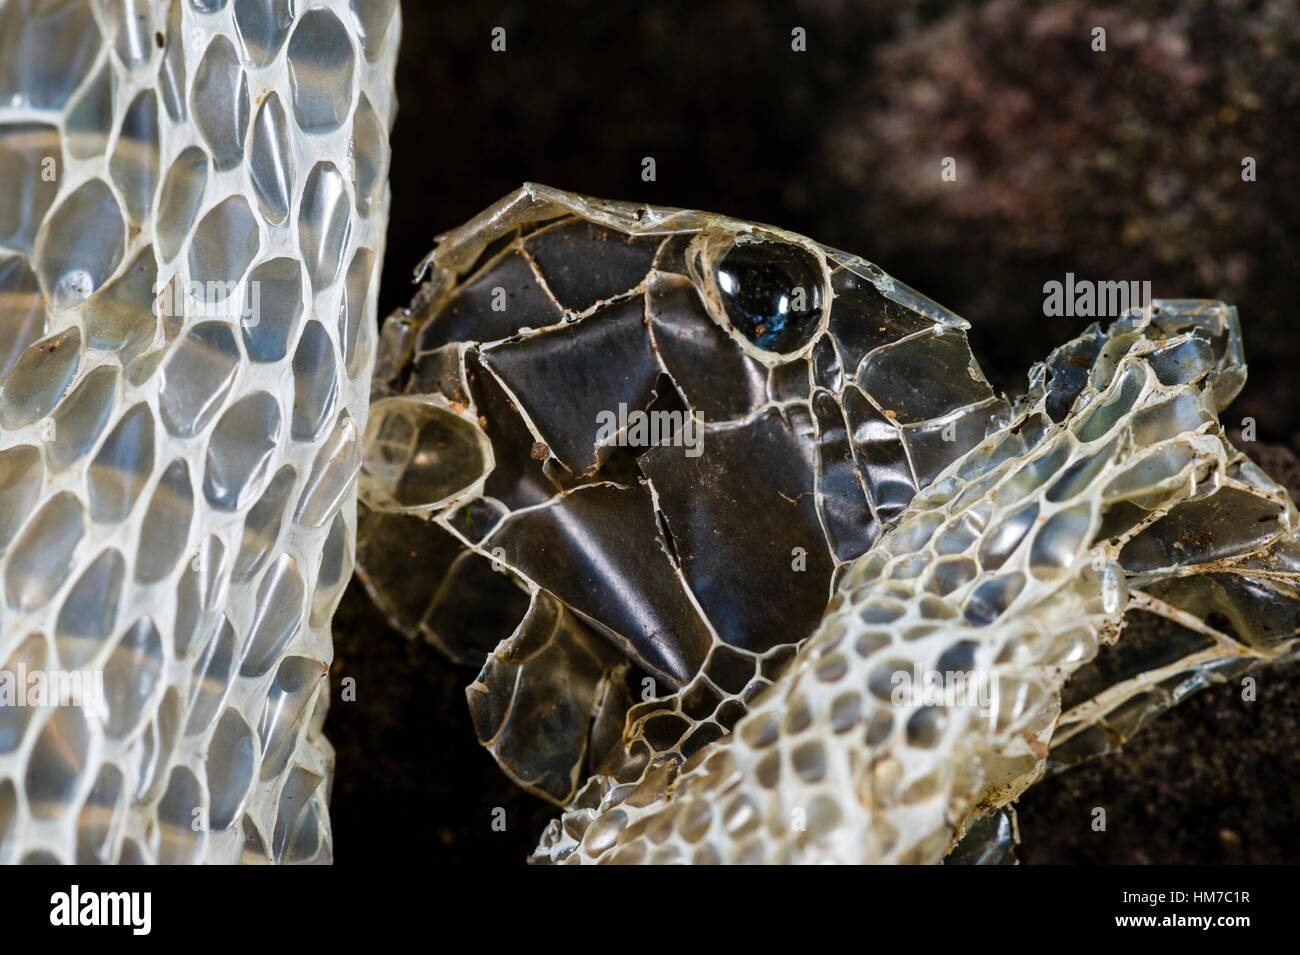 The head and eye scales on the skin shed from a venomous snake. Stock Photo